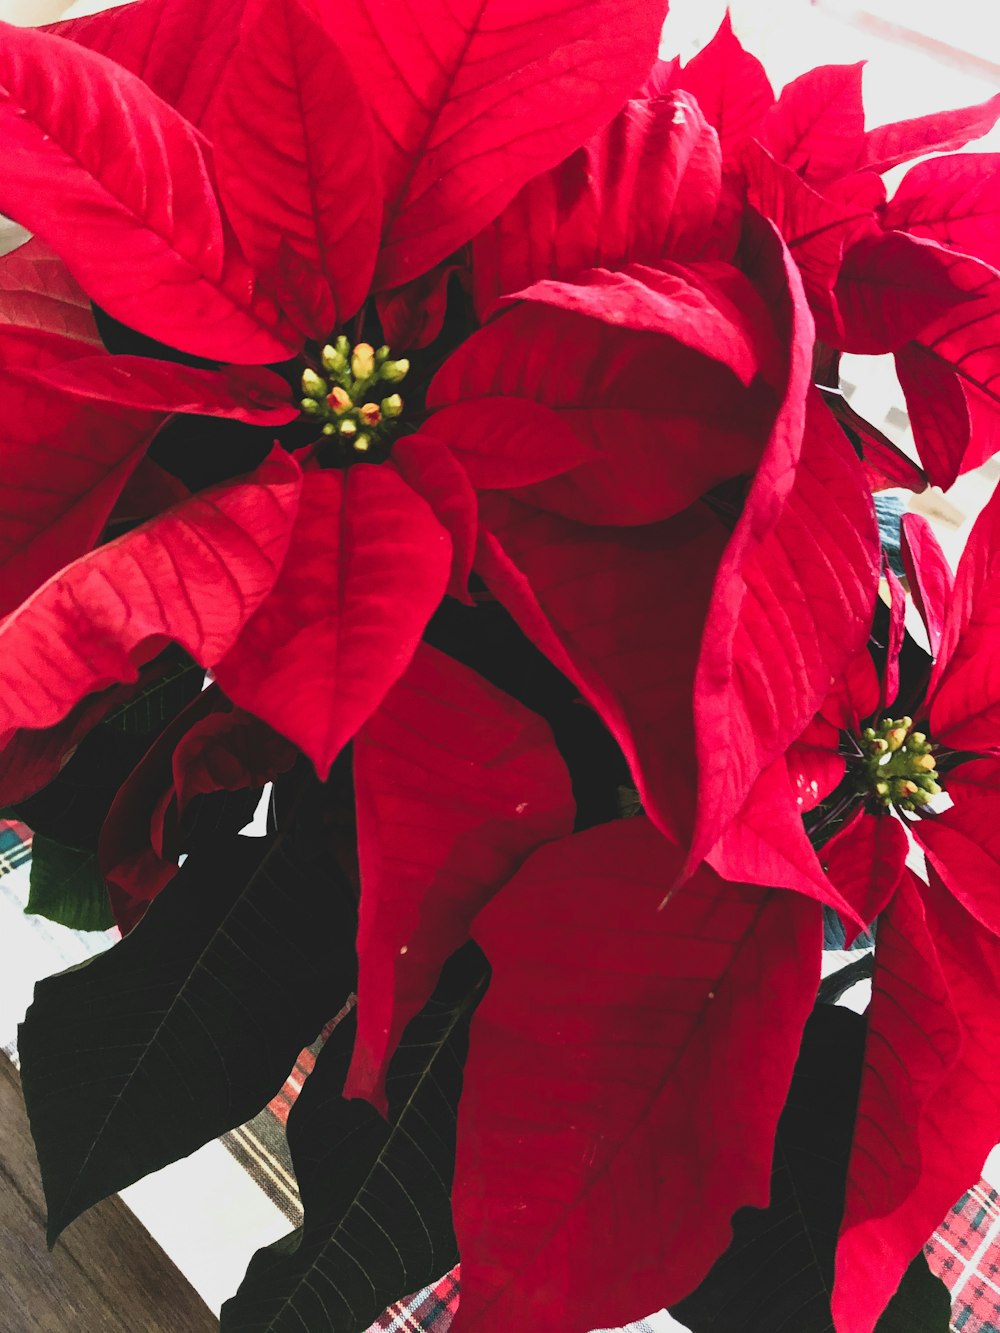 red poinsettia in close up photography